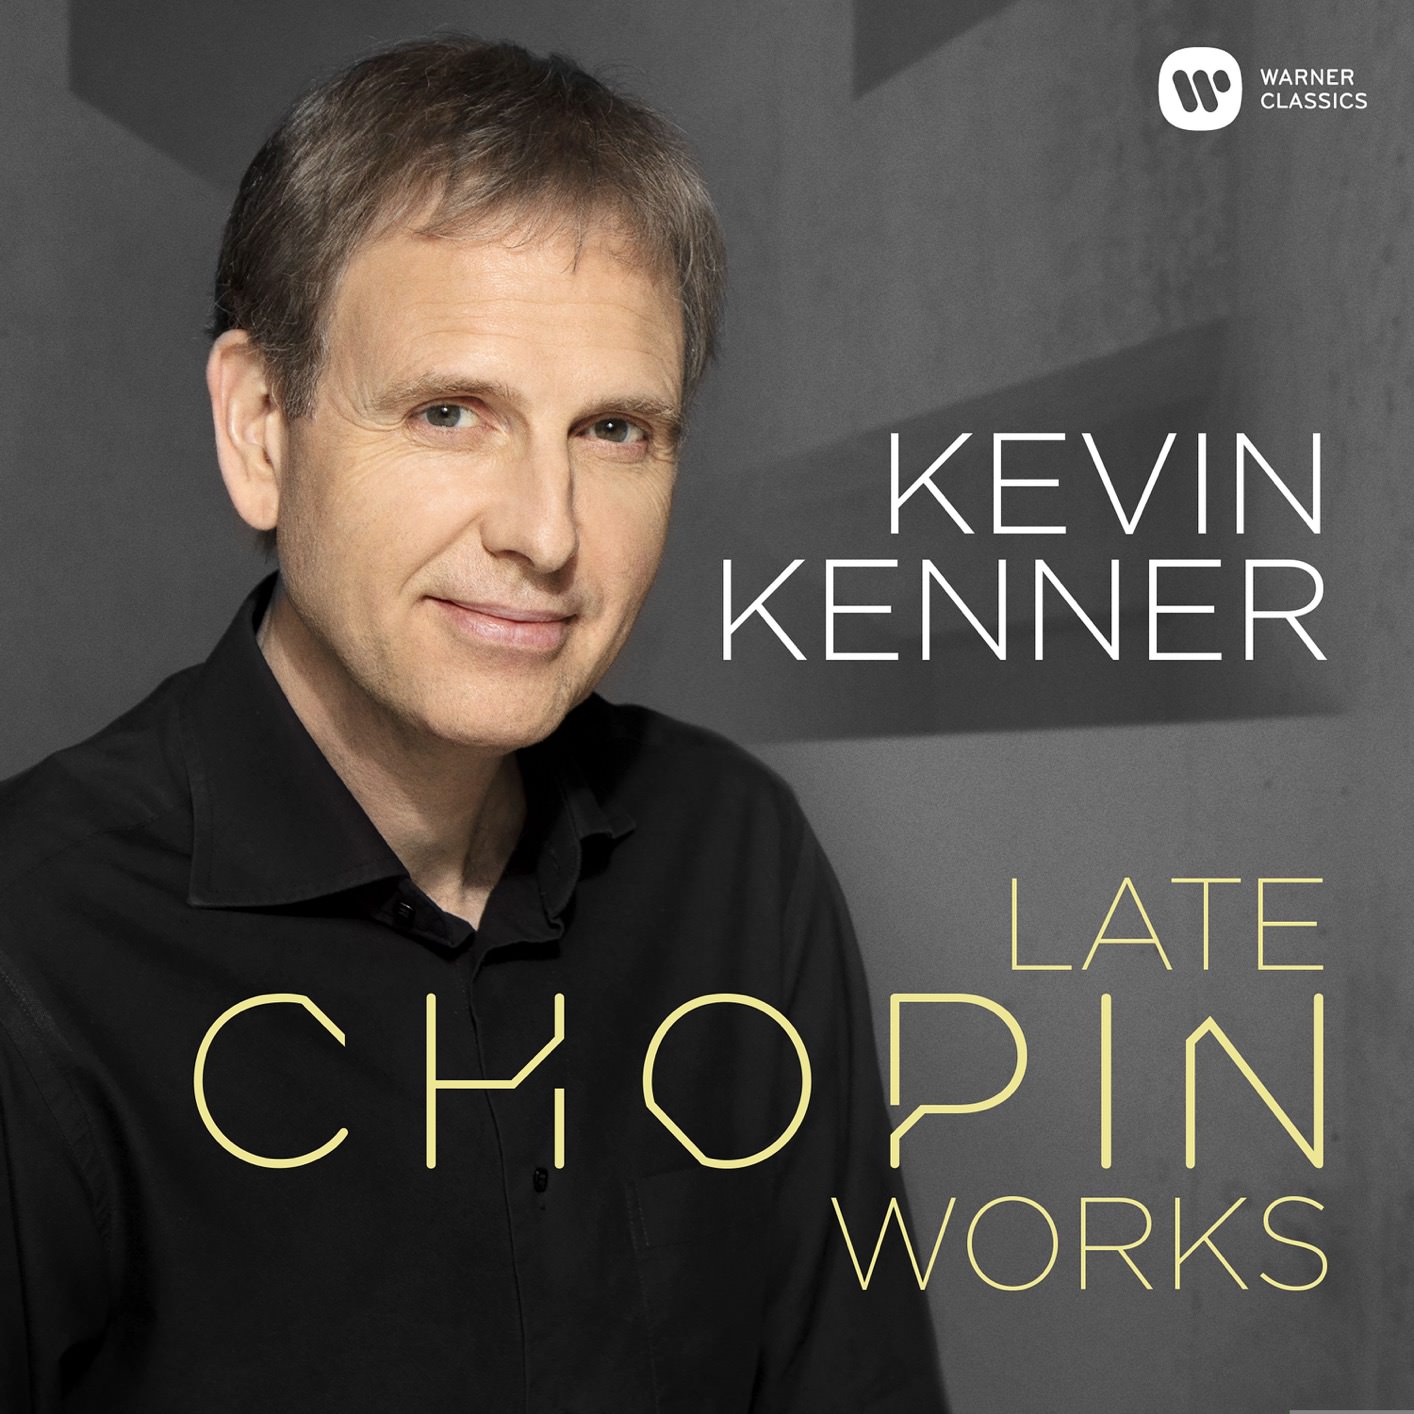 Kevin Kenner – Late Chopin Works (2018) [FLAC 24bit/96kHz]